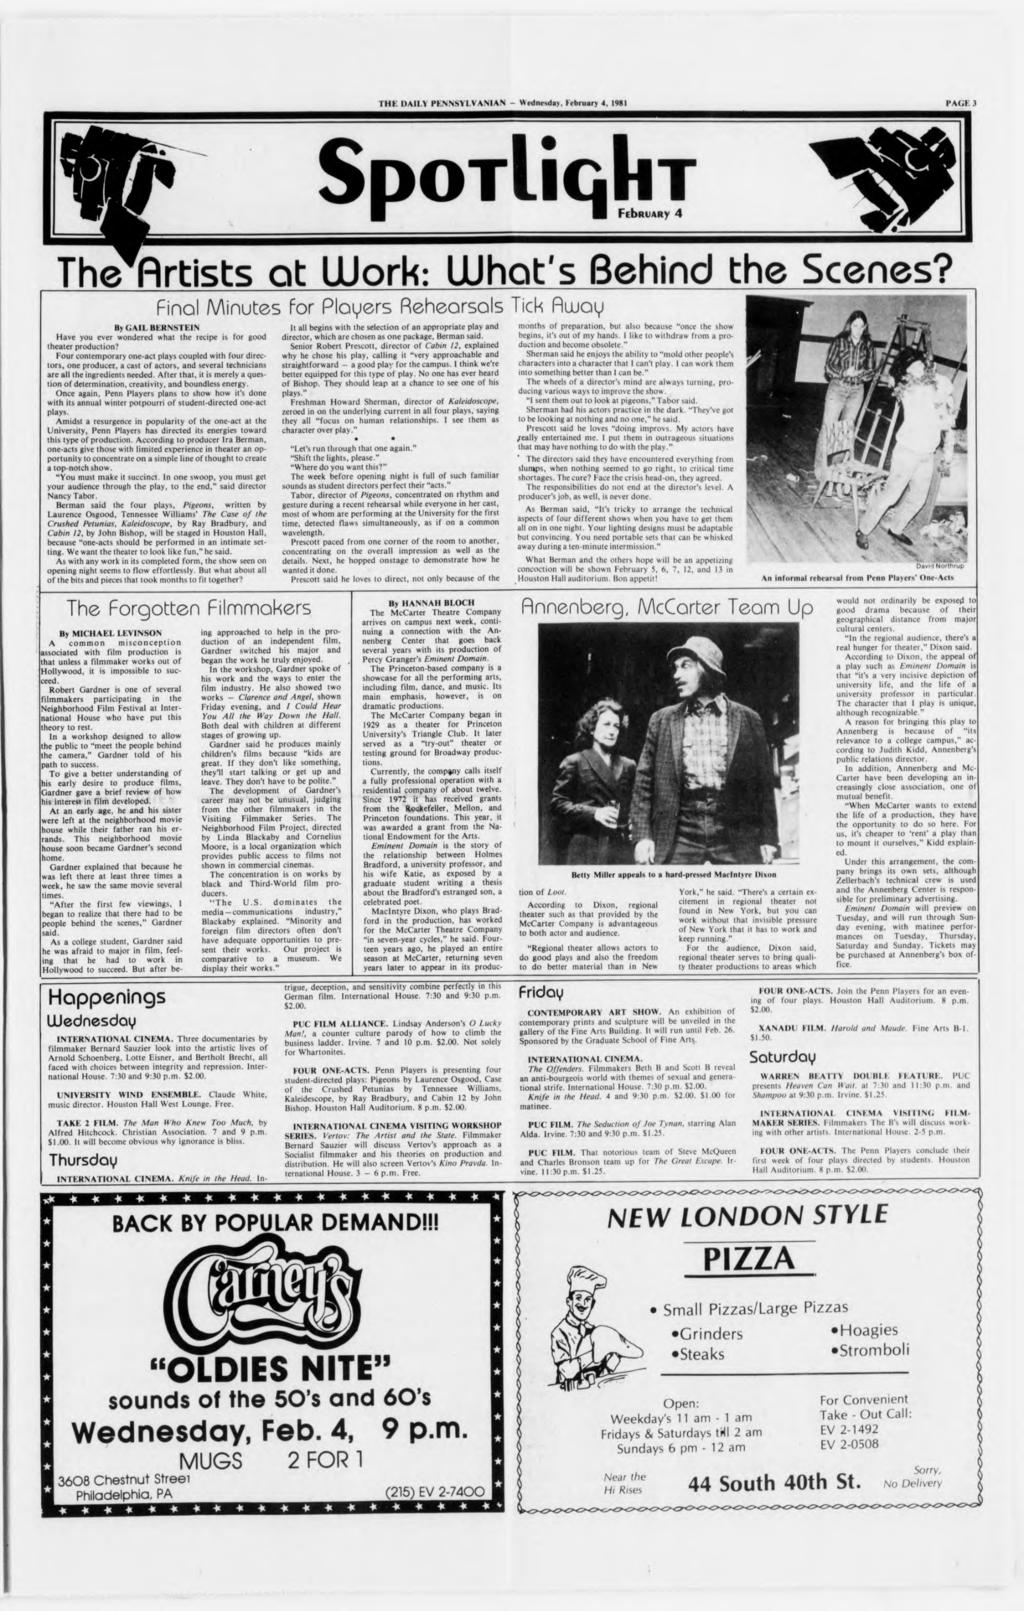 THE DAILY PENNSYLVANIAN - Wednesday. February 4. 1981 PAGE 3 SpoTlqhT V * FcbRUARy 4 The*Rrtsts at UUork: What's Behnd the Scenes?